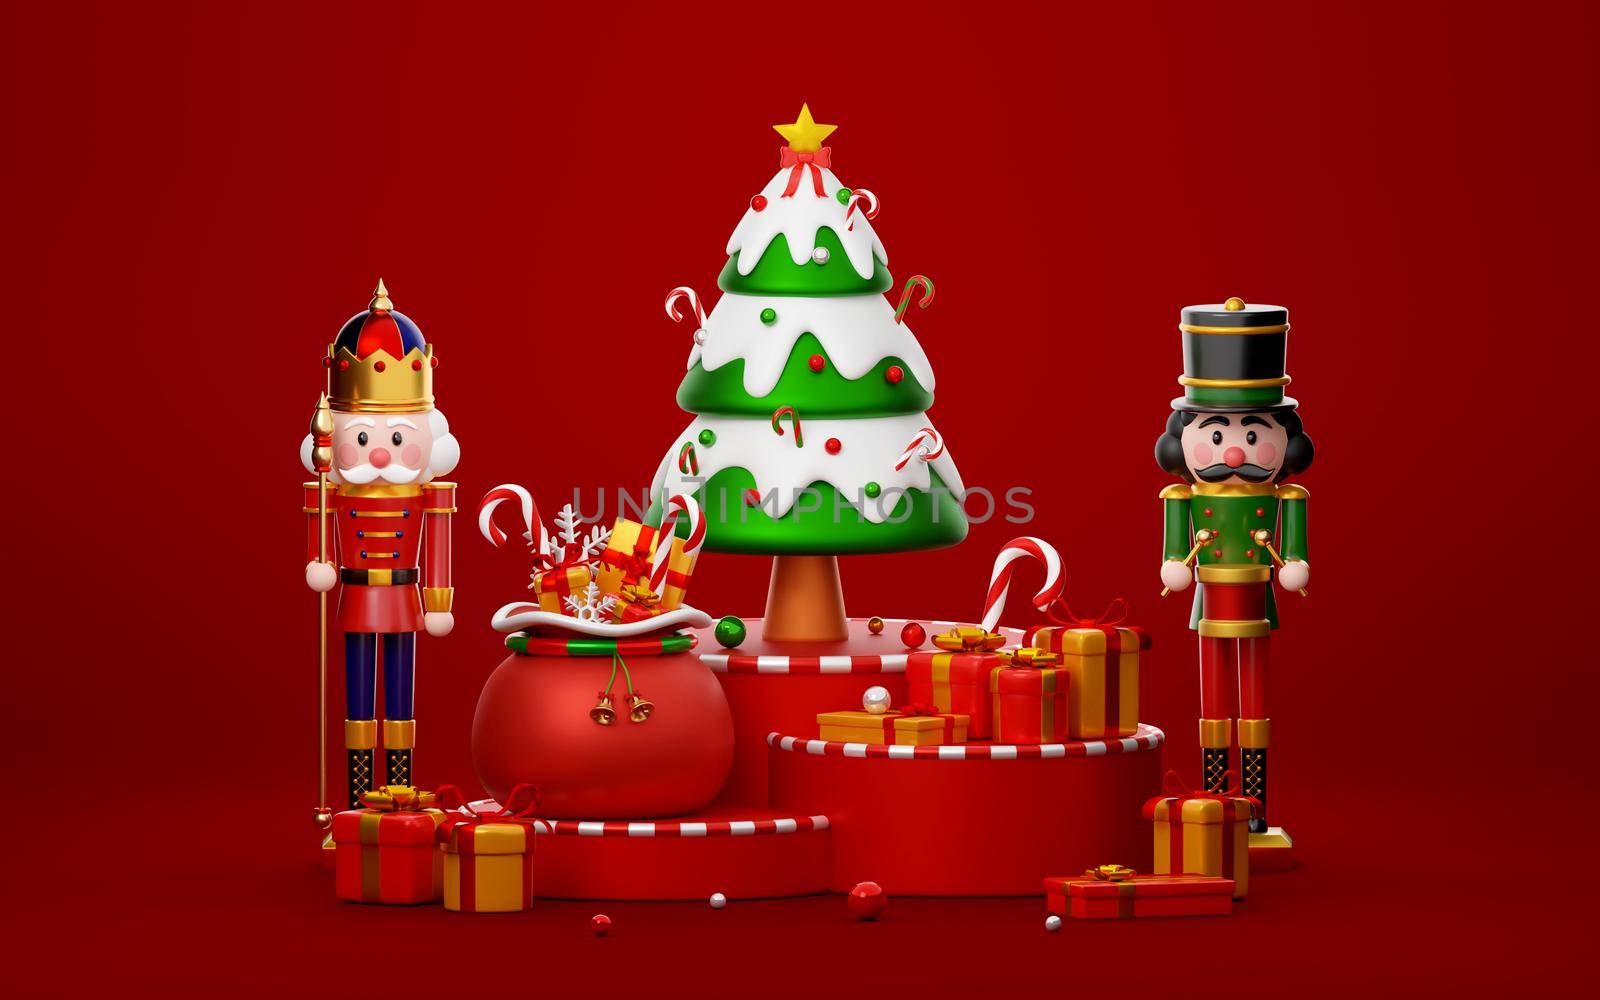 Nutcracker standing by Christmas tree and presents on podium, 3d illustration by nutzchotwarut